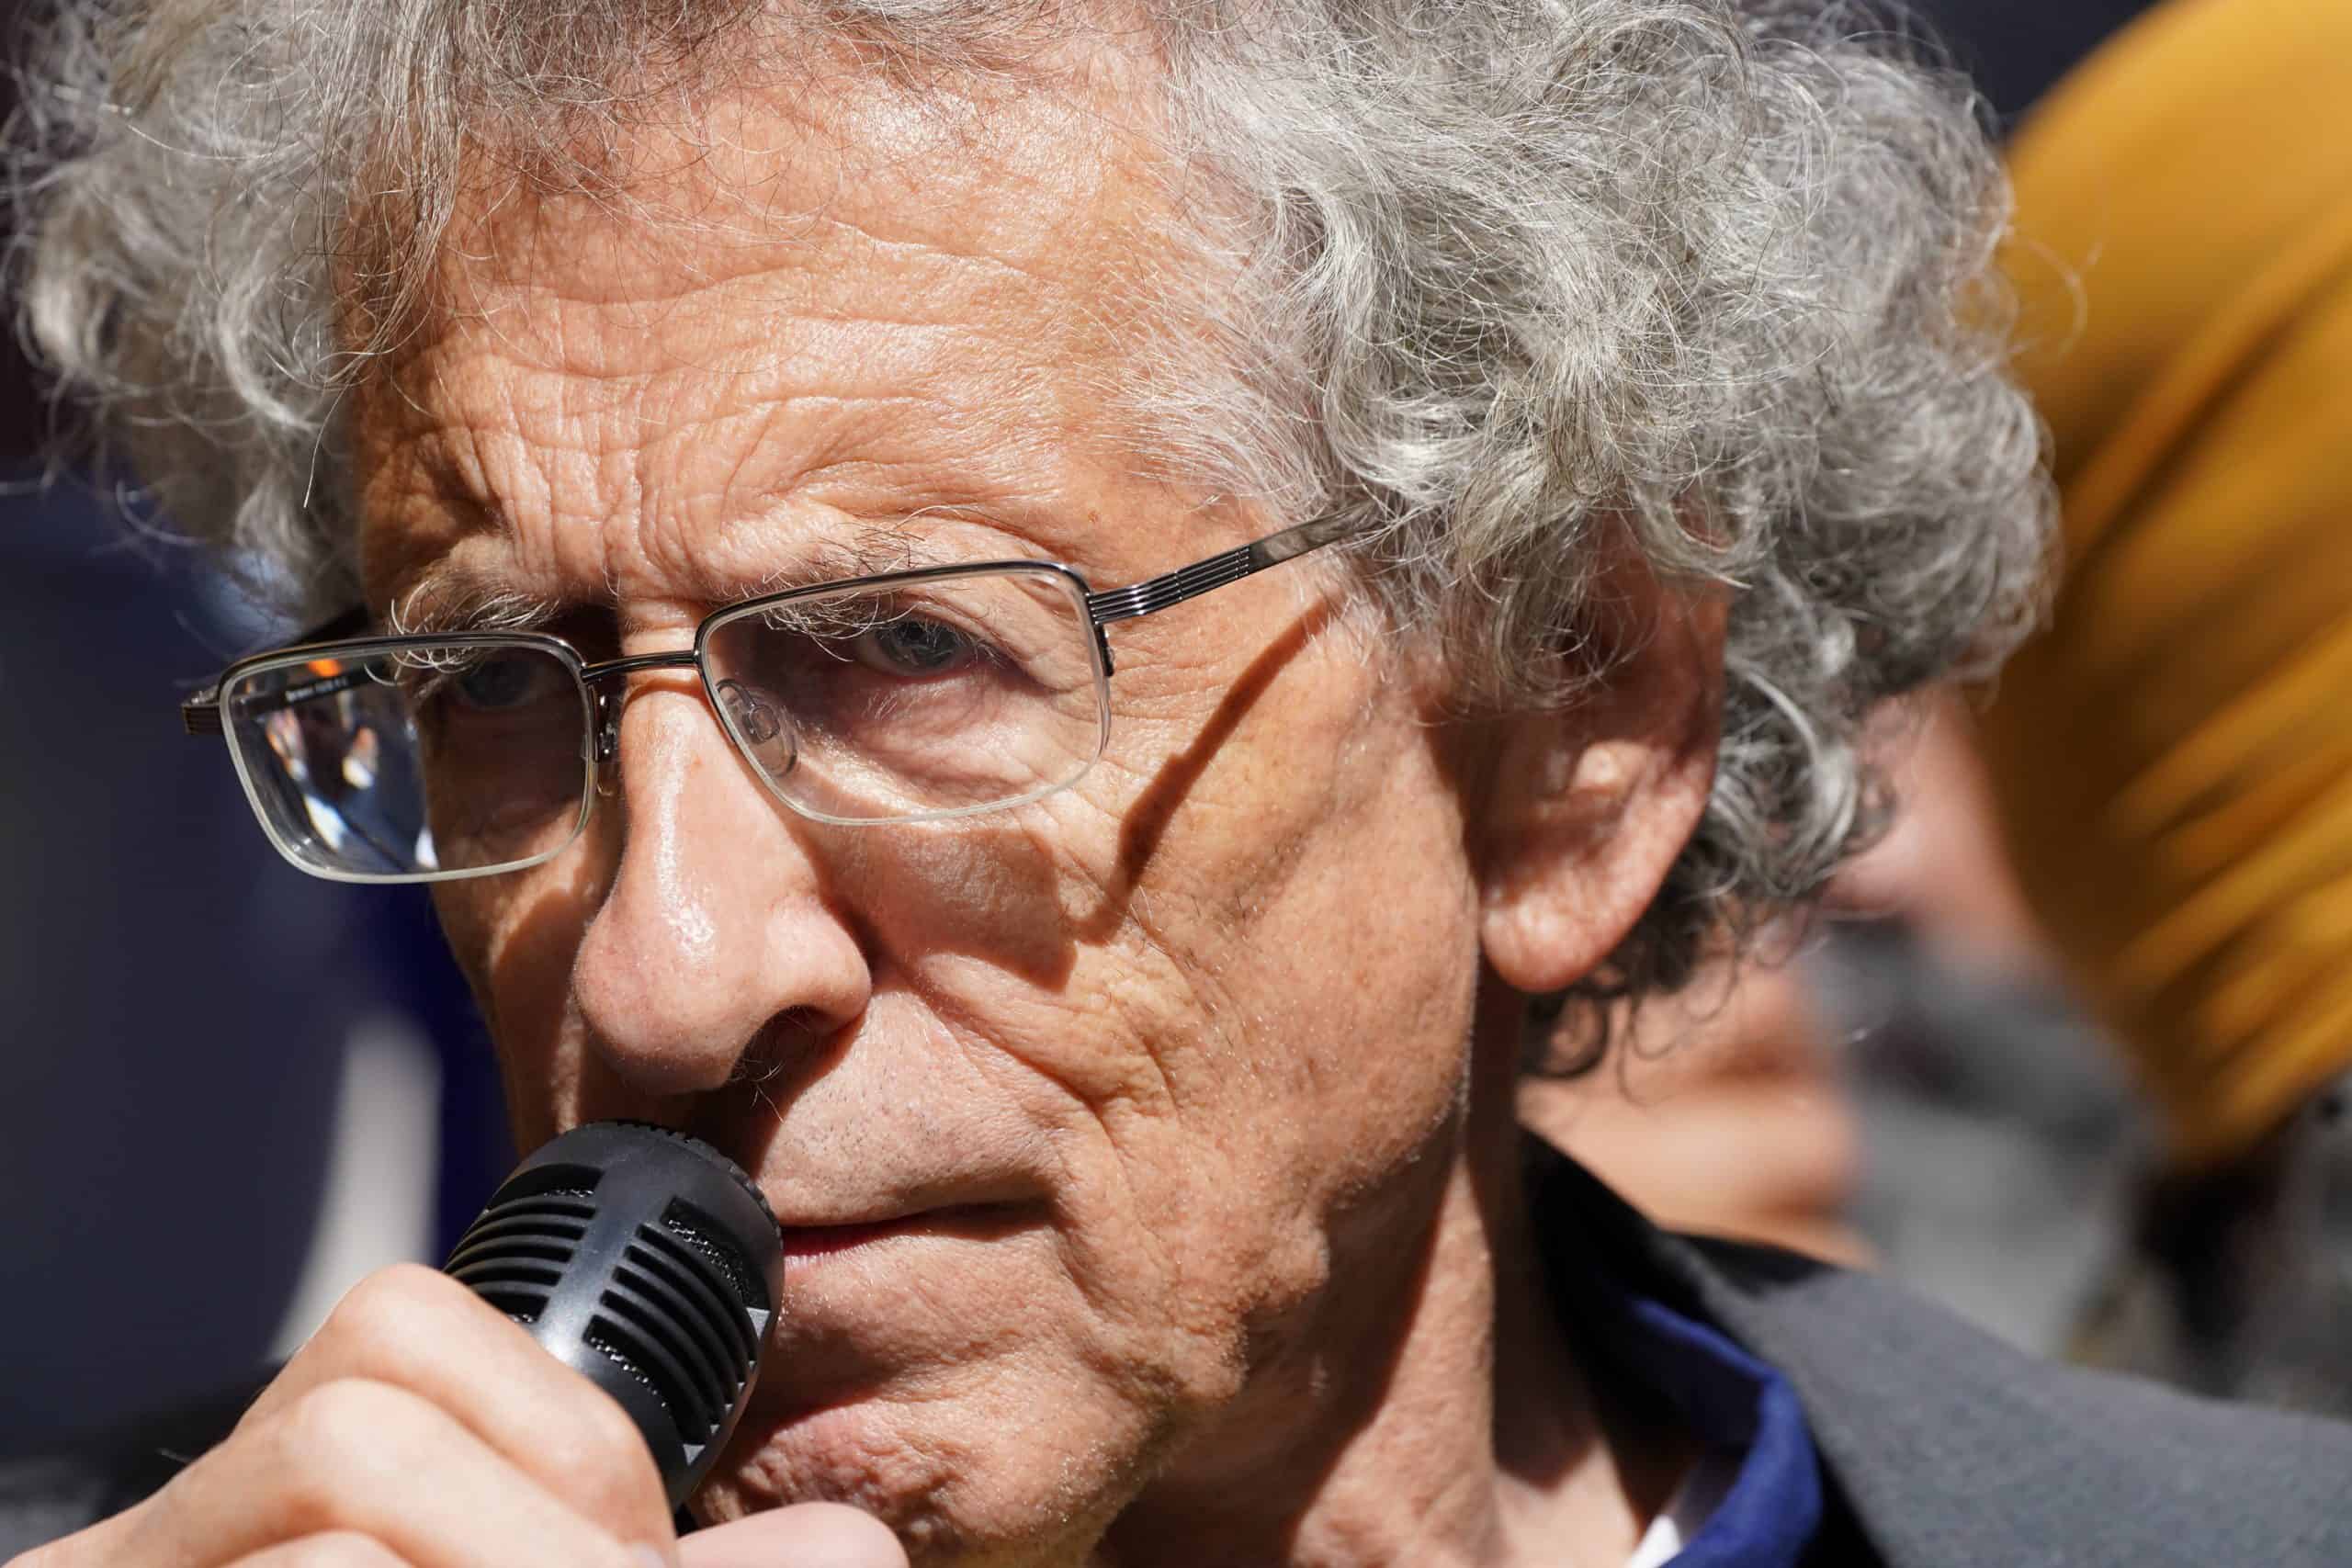 Watch: Piers Corbyn heckles brother Jeremy at climate event